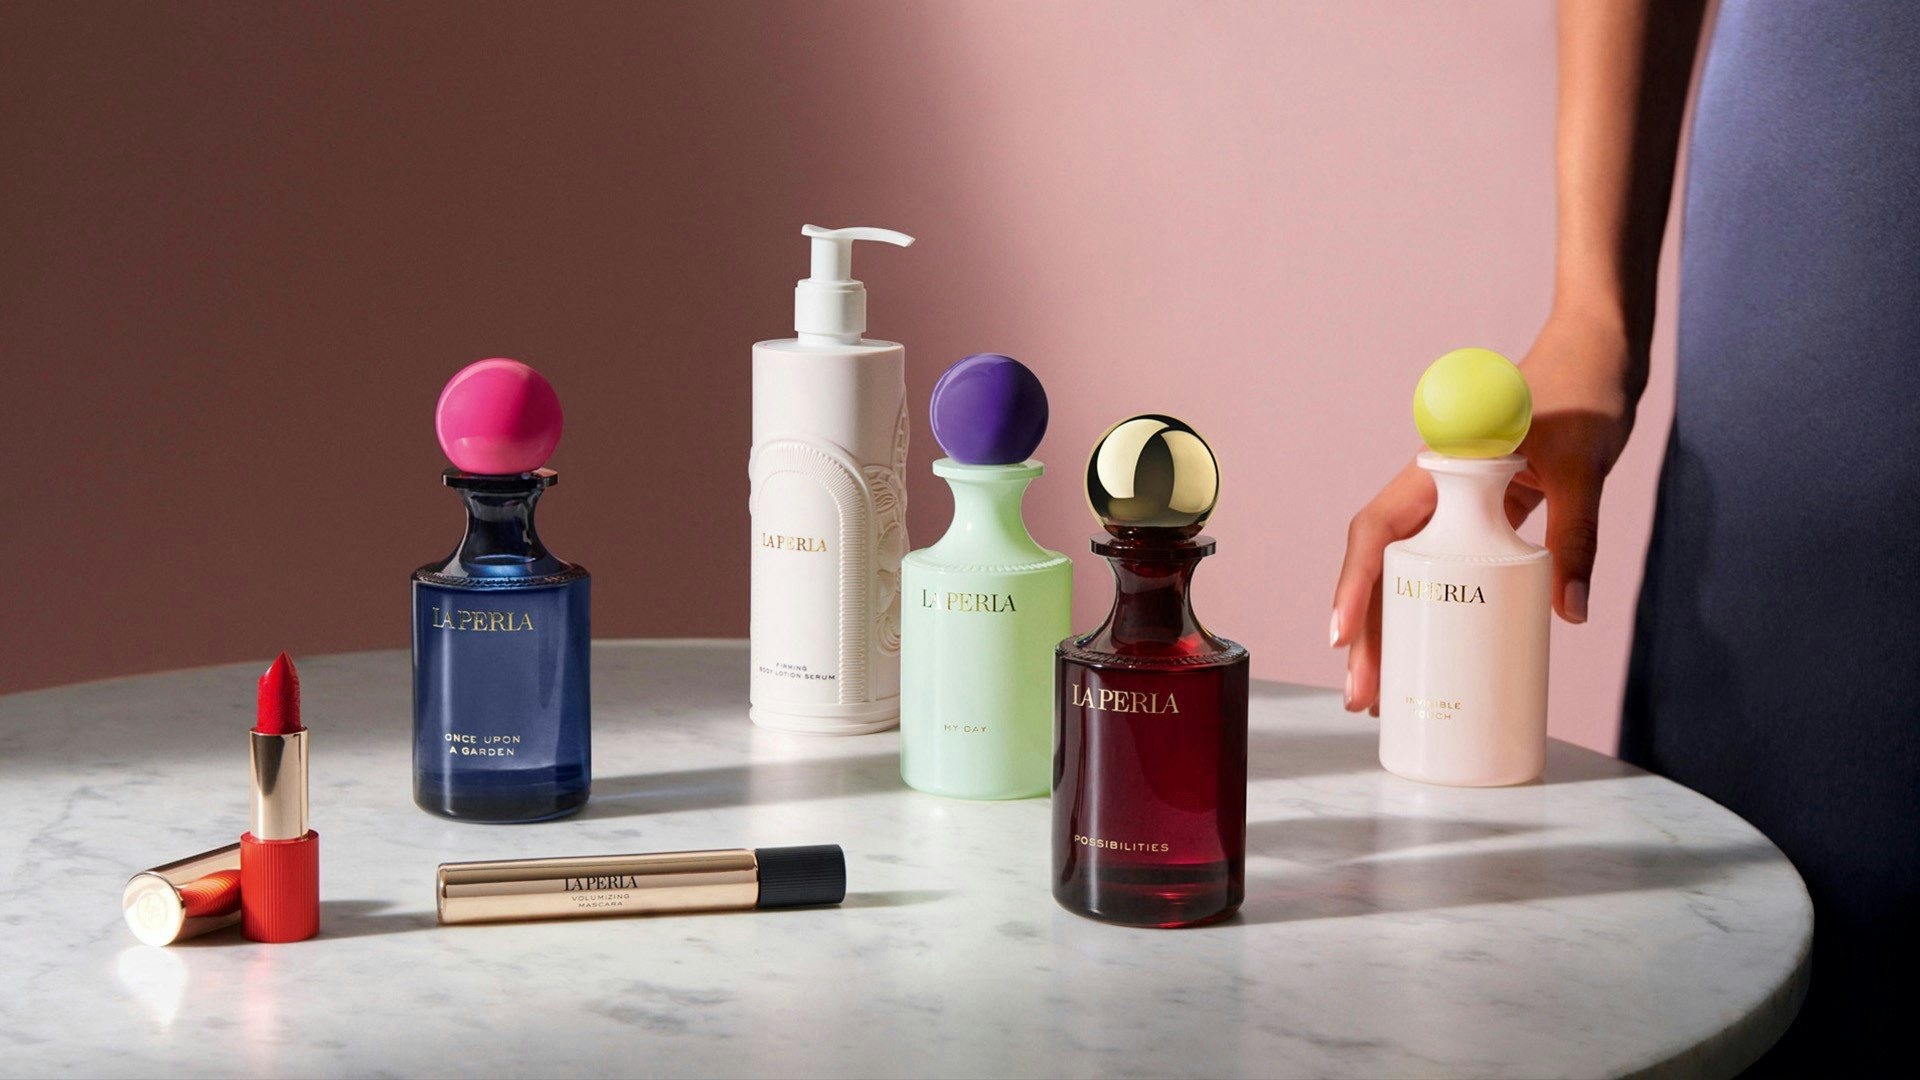 Italian luxury lingerie brand La Perla launched a perfume collection with beauty to follow. But will it help the brand gain young Chinese consumers? Photo: La Perla